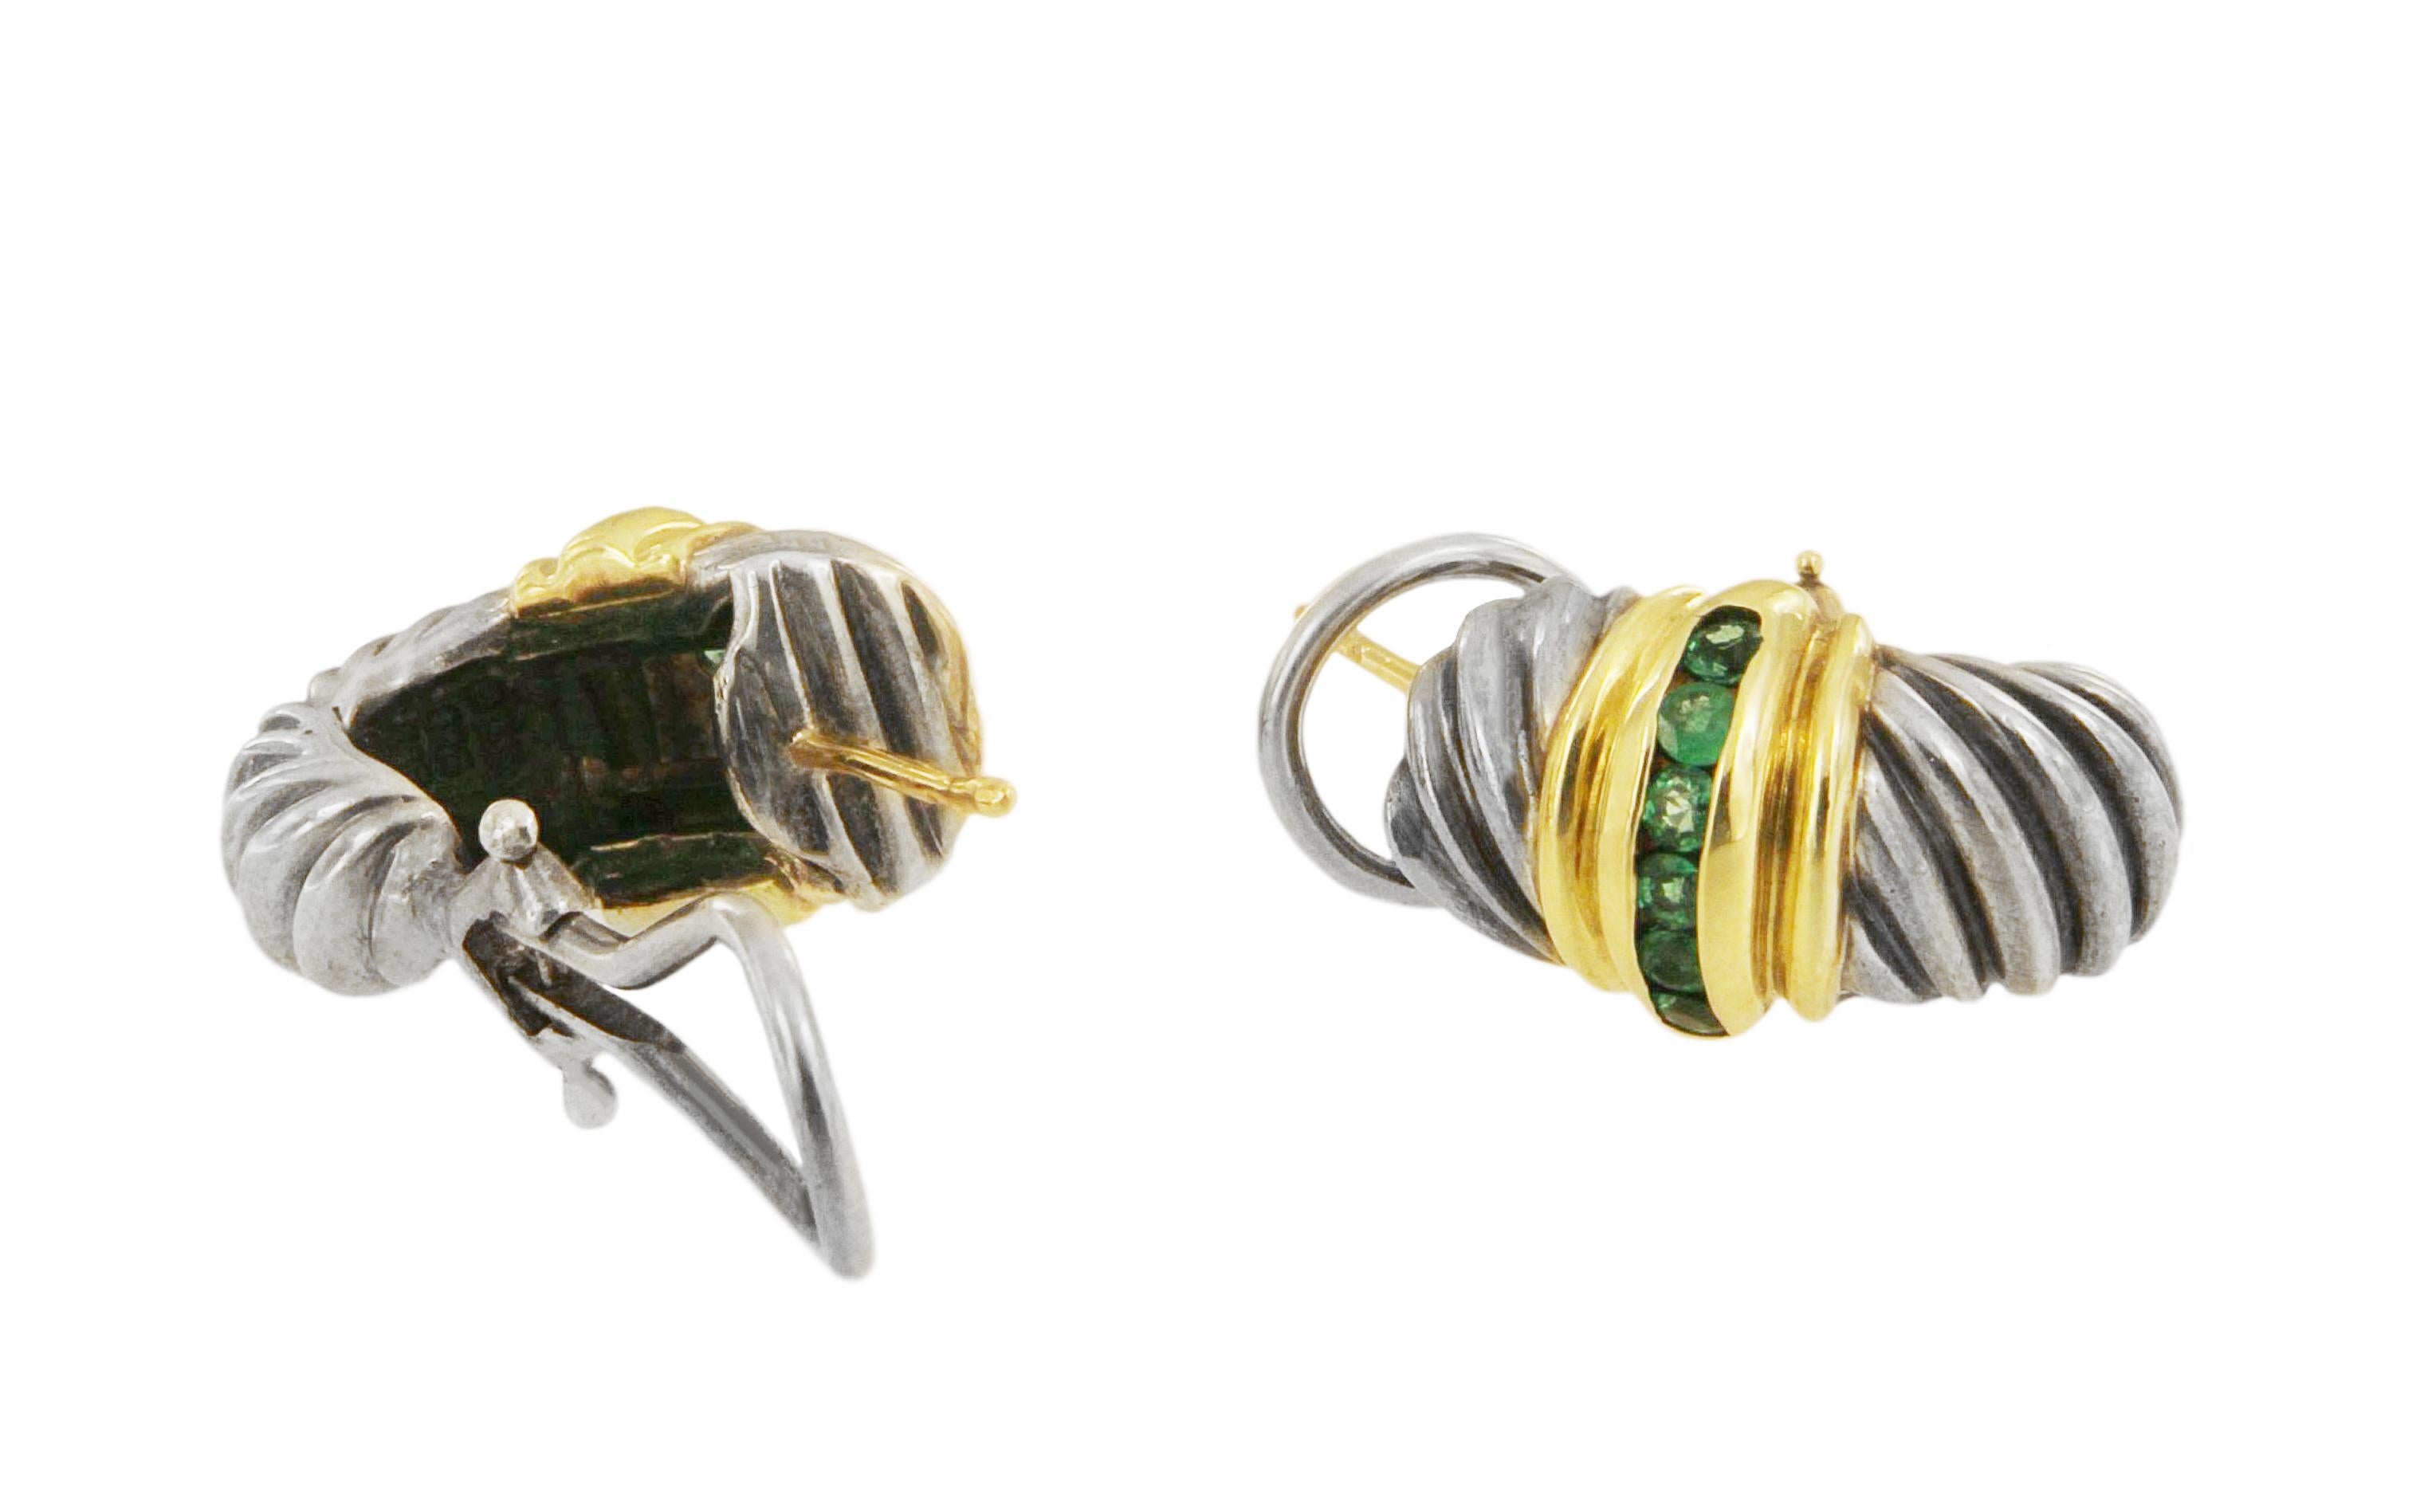 -Mint condition
-Sterling silver & 14k yellow gold
-12.5 grams
-18.7 x 10.8mm each
-12 round genuine green emeralds (.40ctw)
-Includes David Yurman box